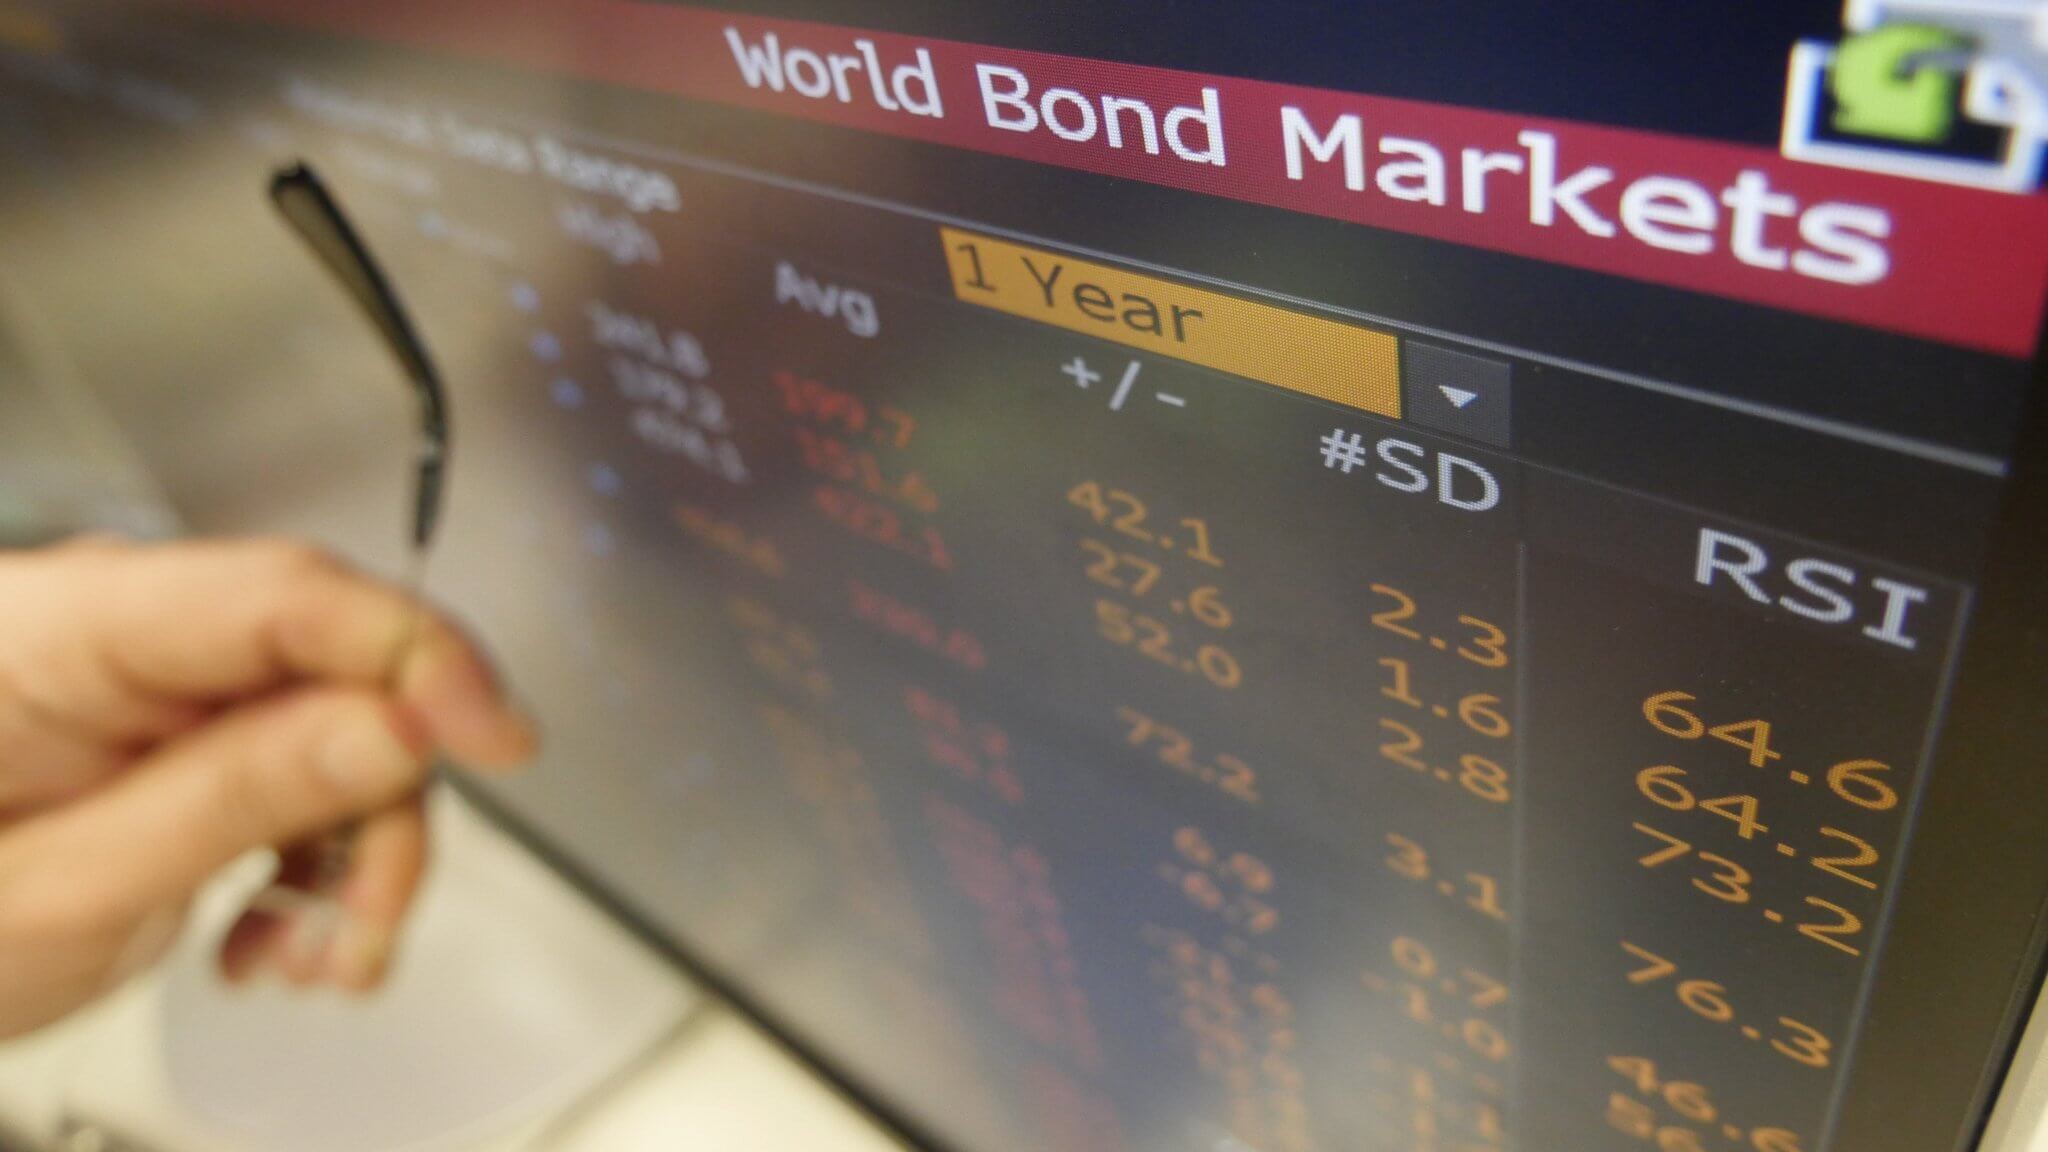 Bond market remains underdeveloped despite years of existence